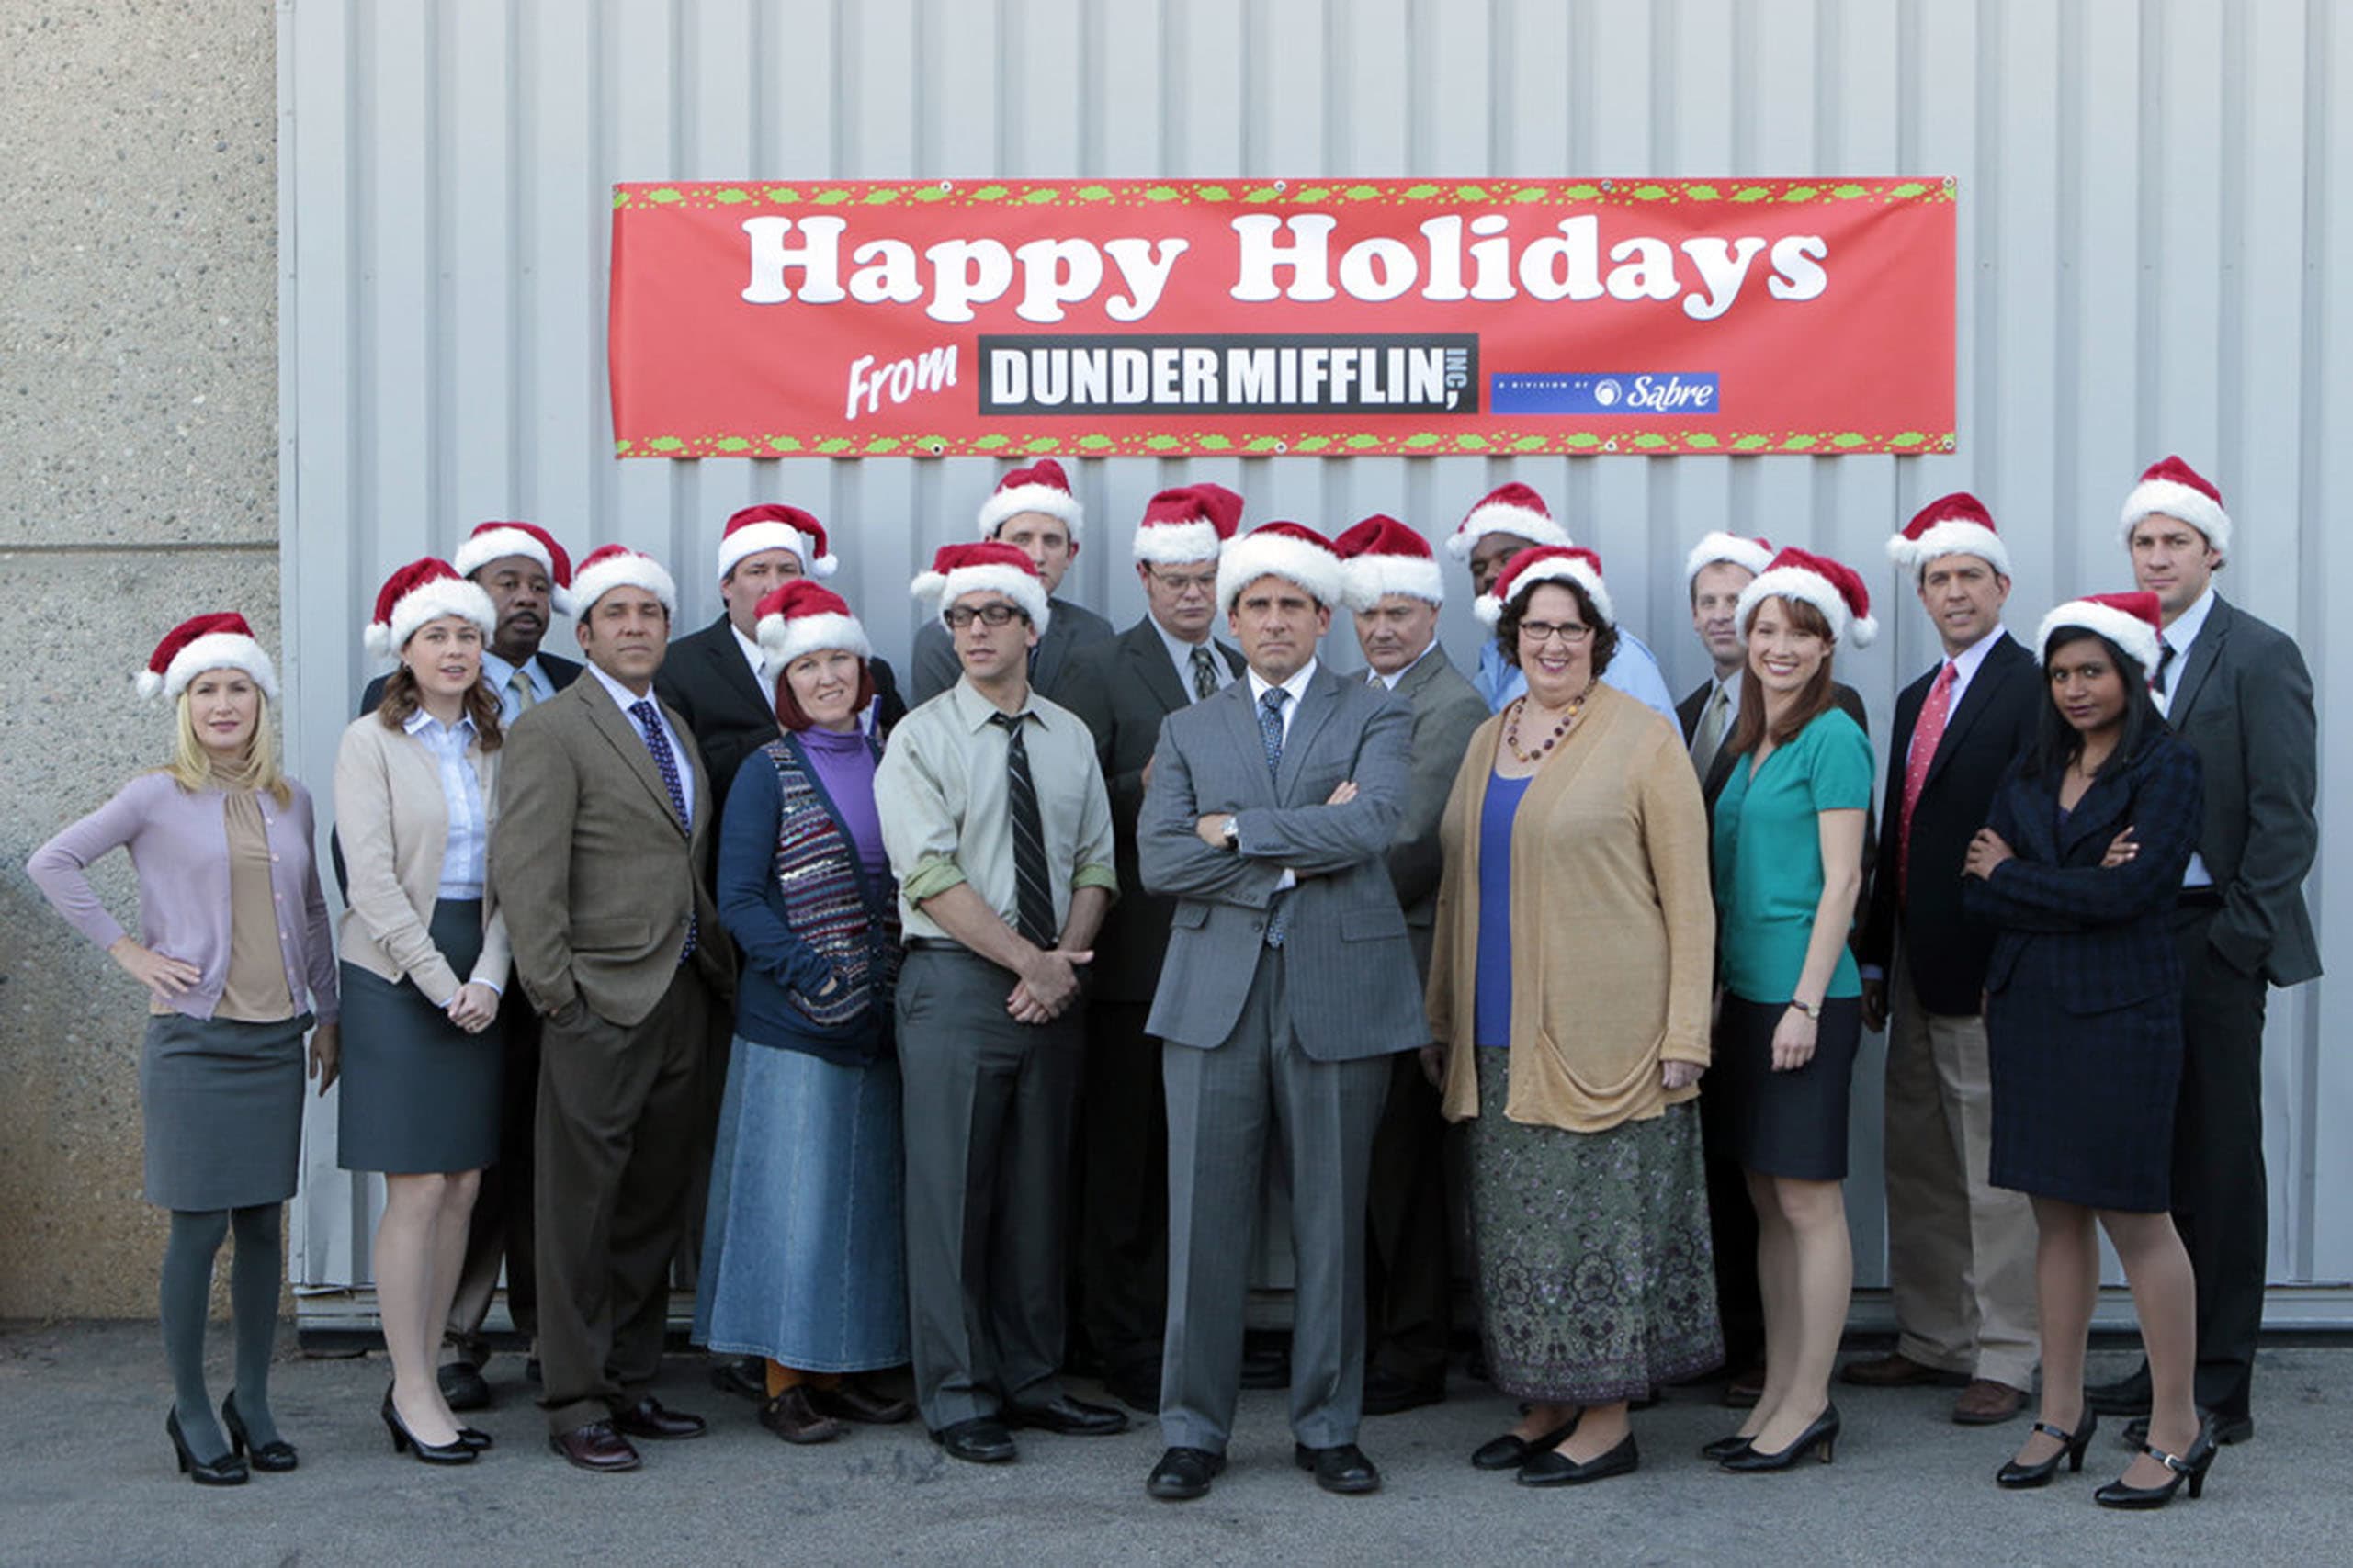 Download The Office Christmas Episodes Ranked By Joy And Awkwardness Yellowimages Mockups